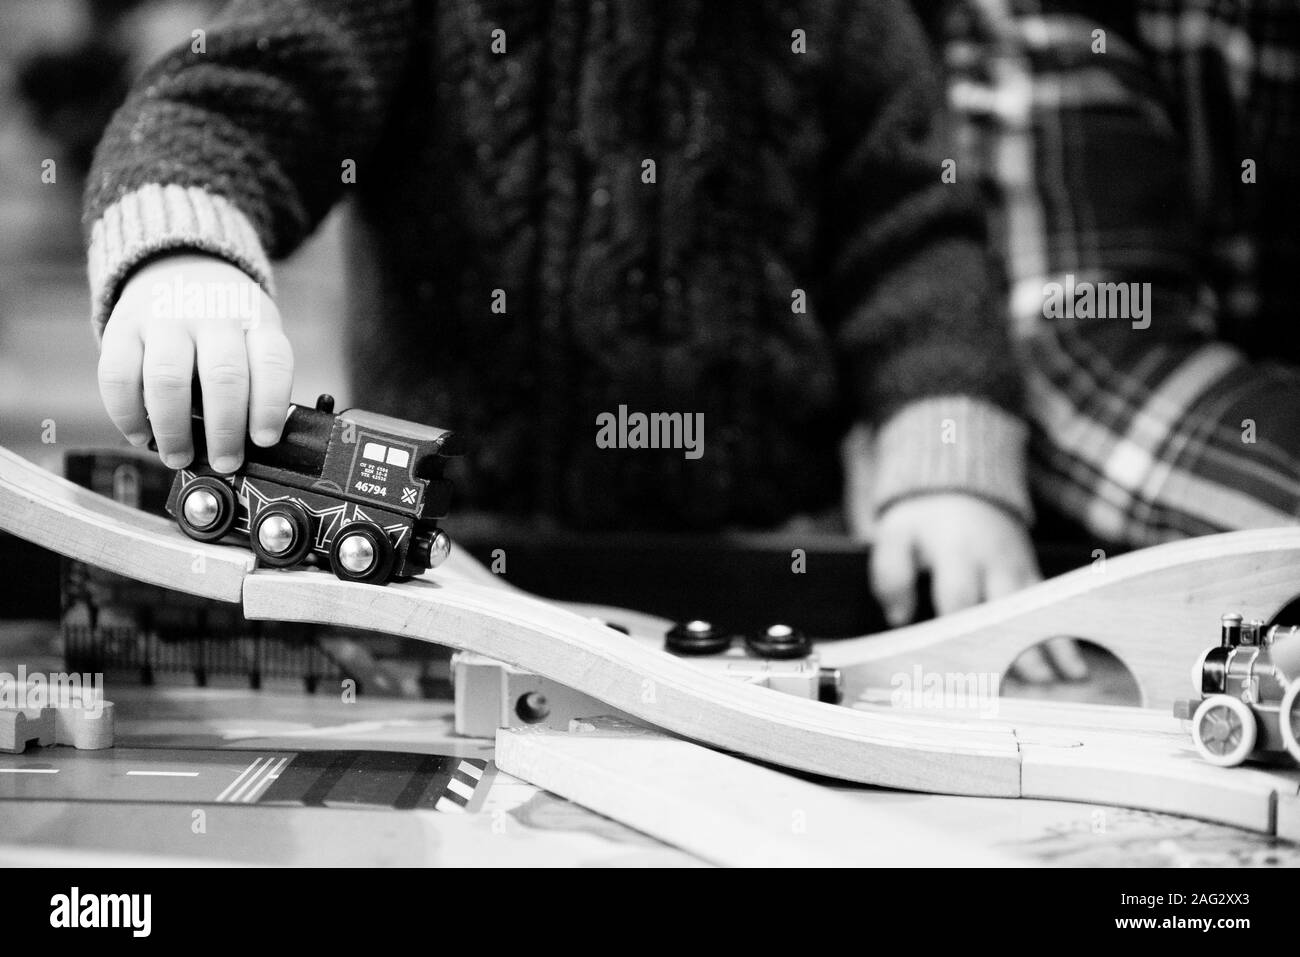 Closeup shot of a child playing with a train toy in black and white Stock Photo